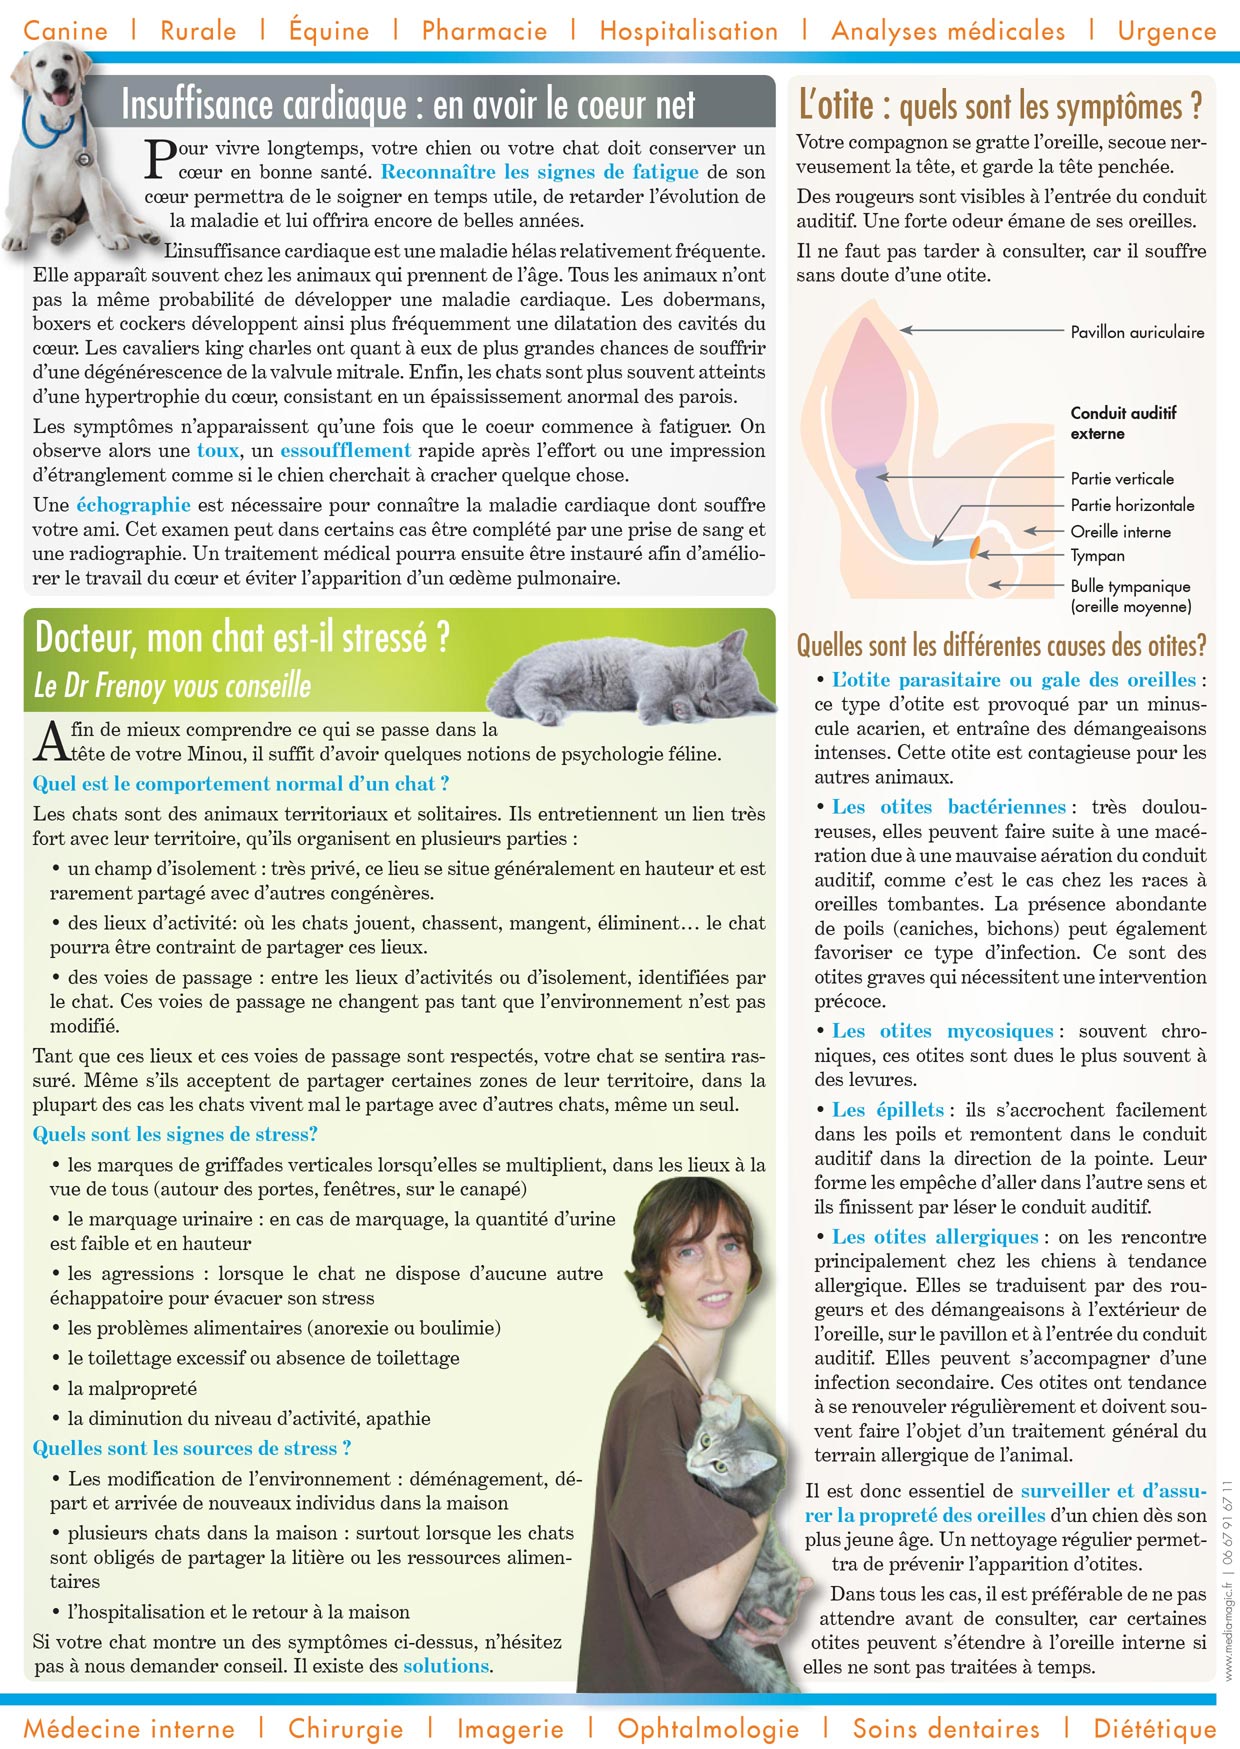 Newsletter - Printemps 2012 page 2